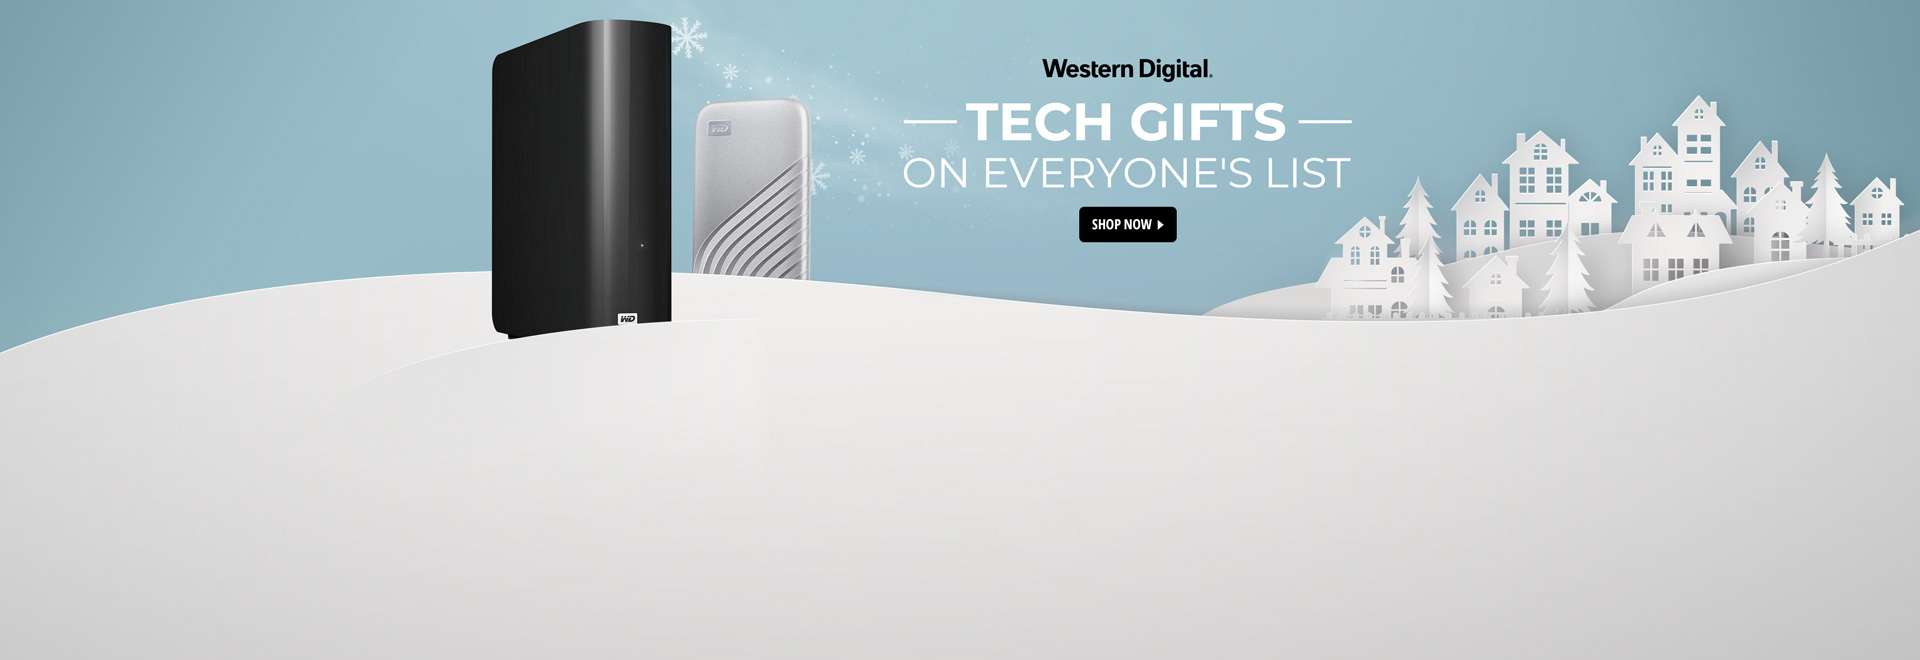 Tech Gifts on Everyone’s List